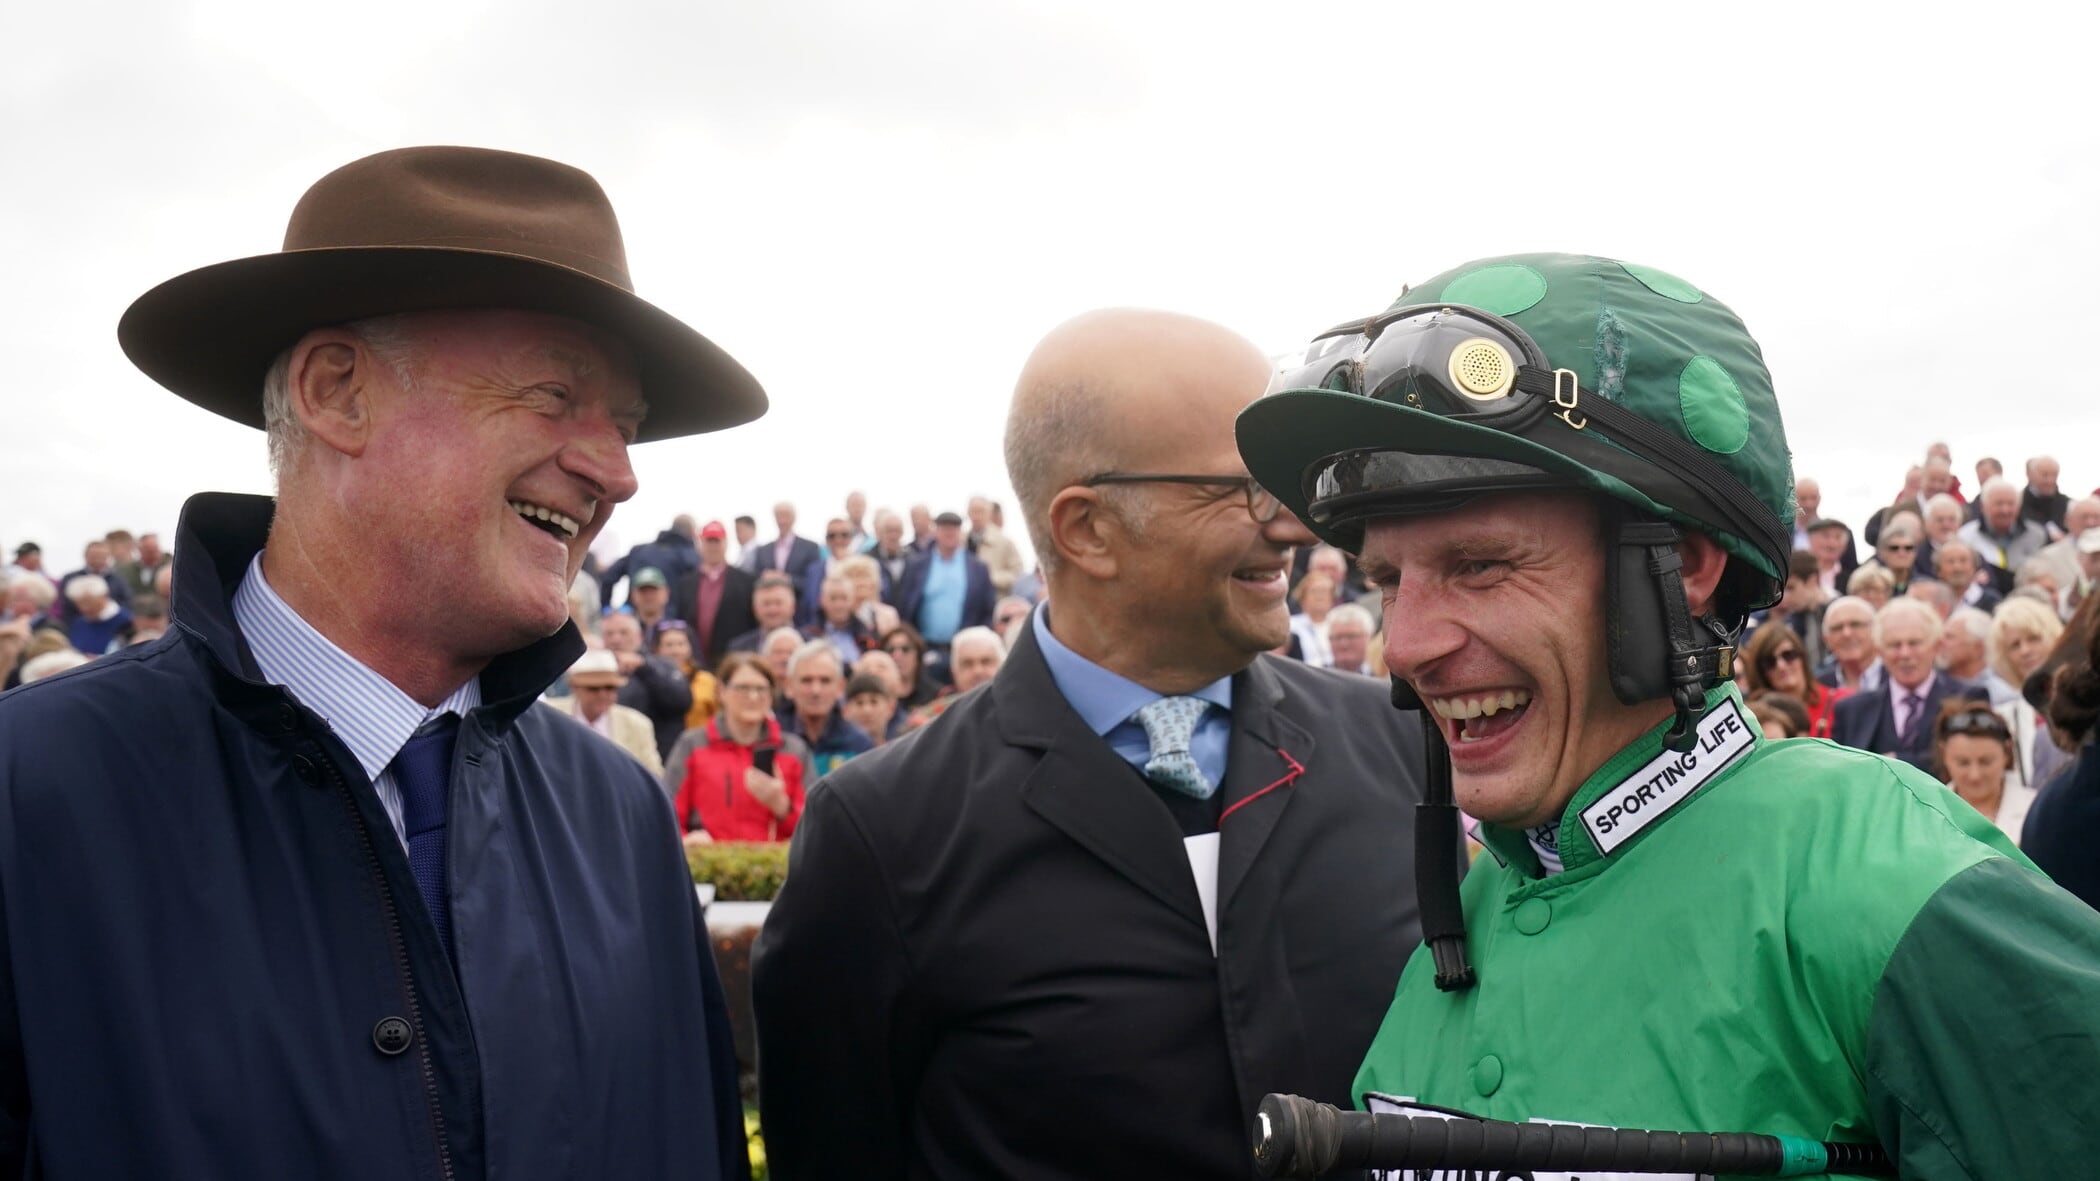  Willie Mullins and Paul Townend can team up for more success at Galway this afternoon, with Power Of Pause fancied in the BoyleSports Handicap Hurdle                  Picture by PA